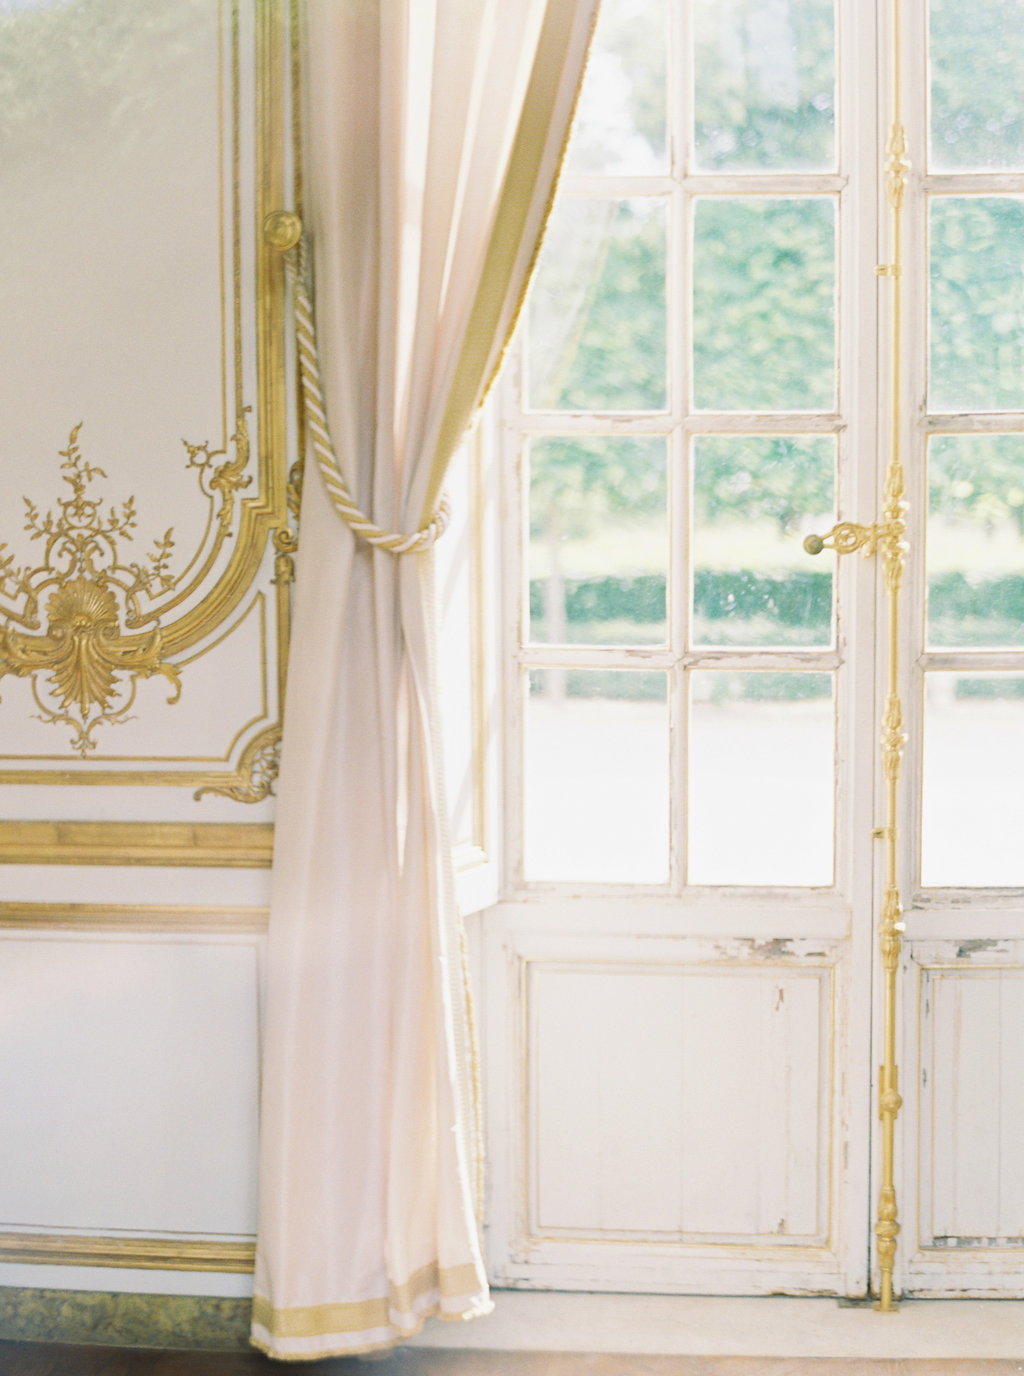 A beautiful wedding in Versailles from the portfolio of Trille Florai. Shot by Sophie Kaye Photography, it features the beautiful work of wedding florist Cara Fitch. You can read more about her here.